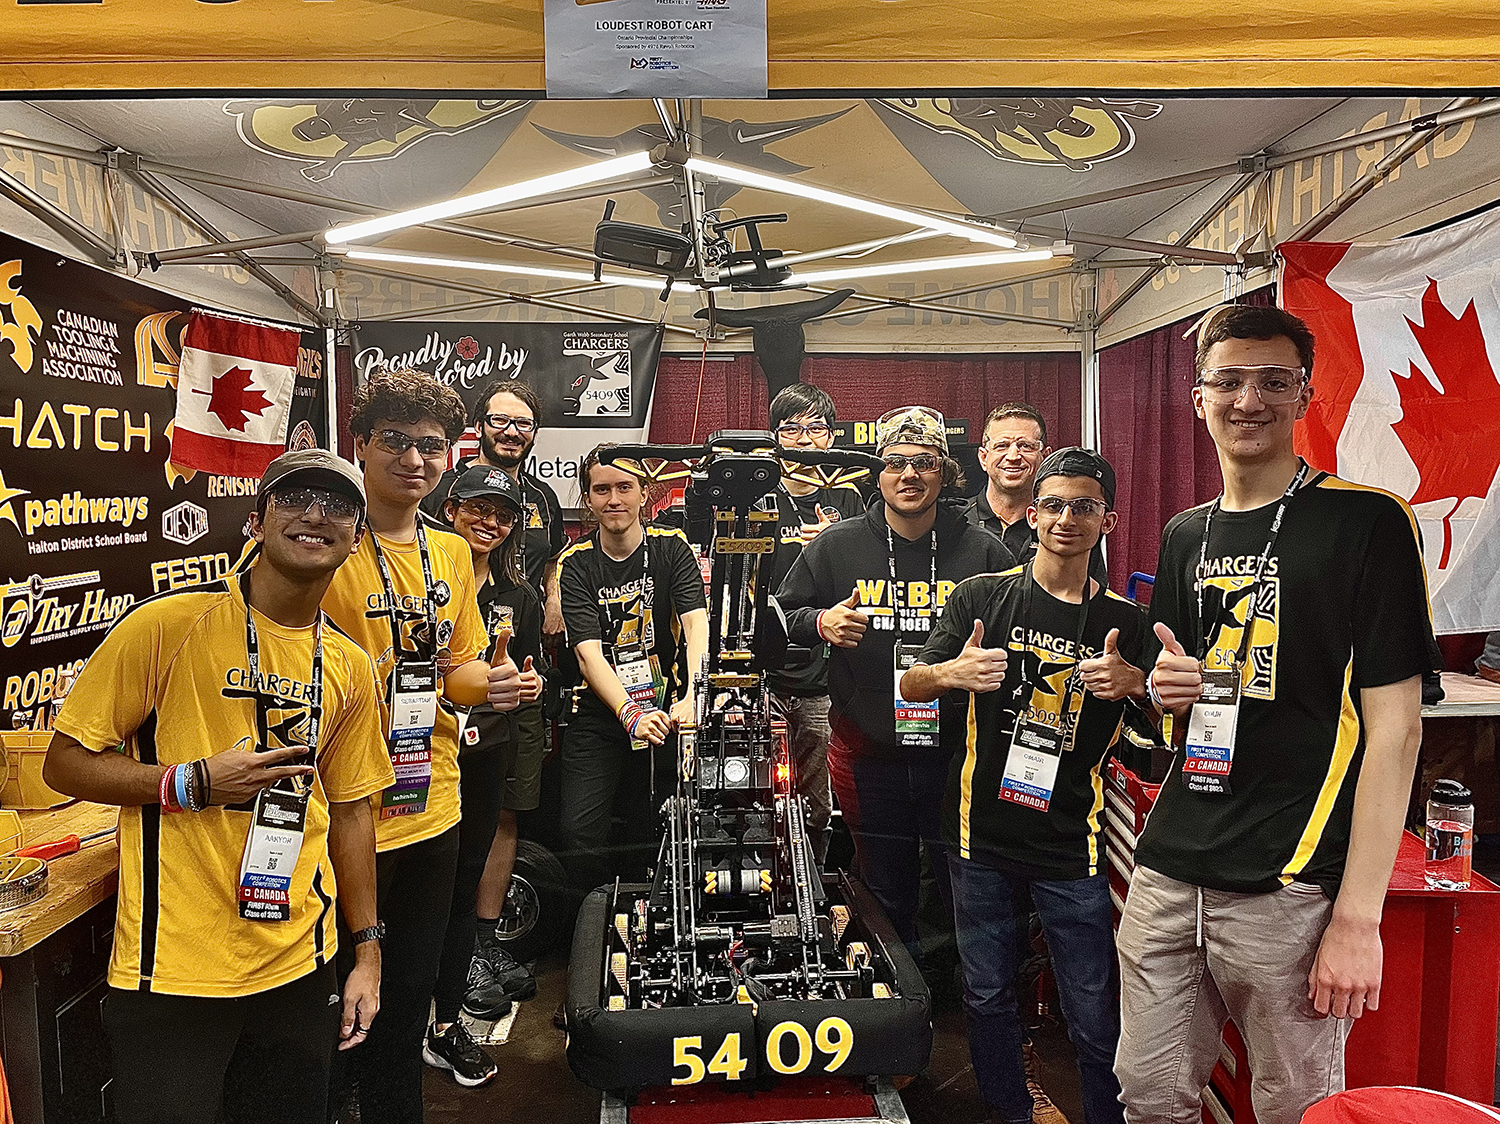 Burckhardt Compression has been supporting the 5409 Chargers team from Oakville, Canada since 2017 and this year they qualified for the world championships in Houston, TX.